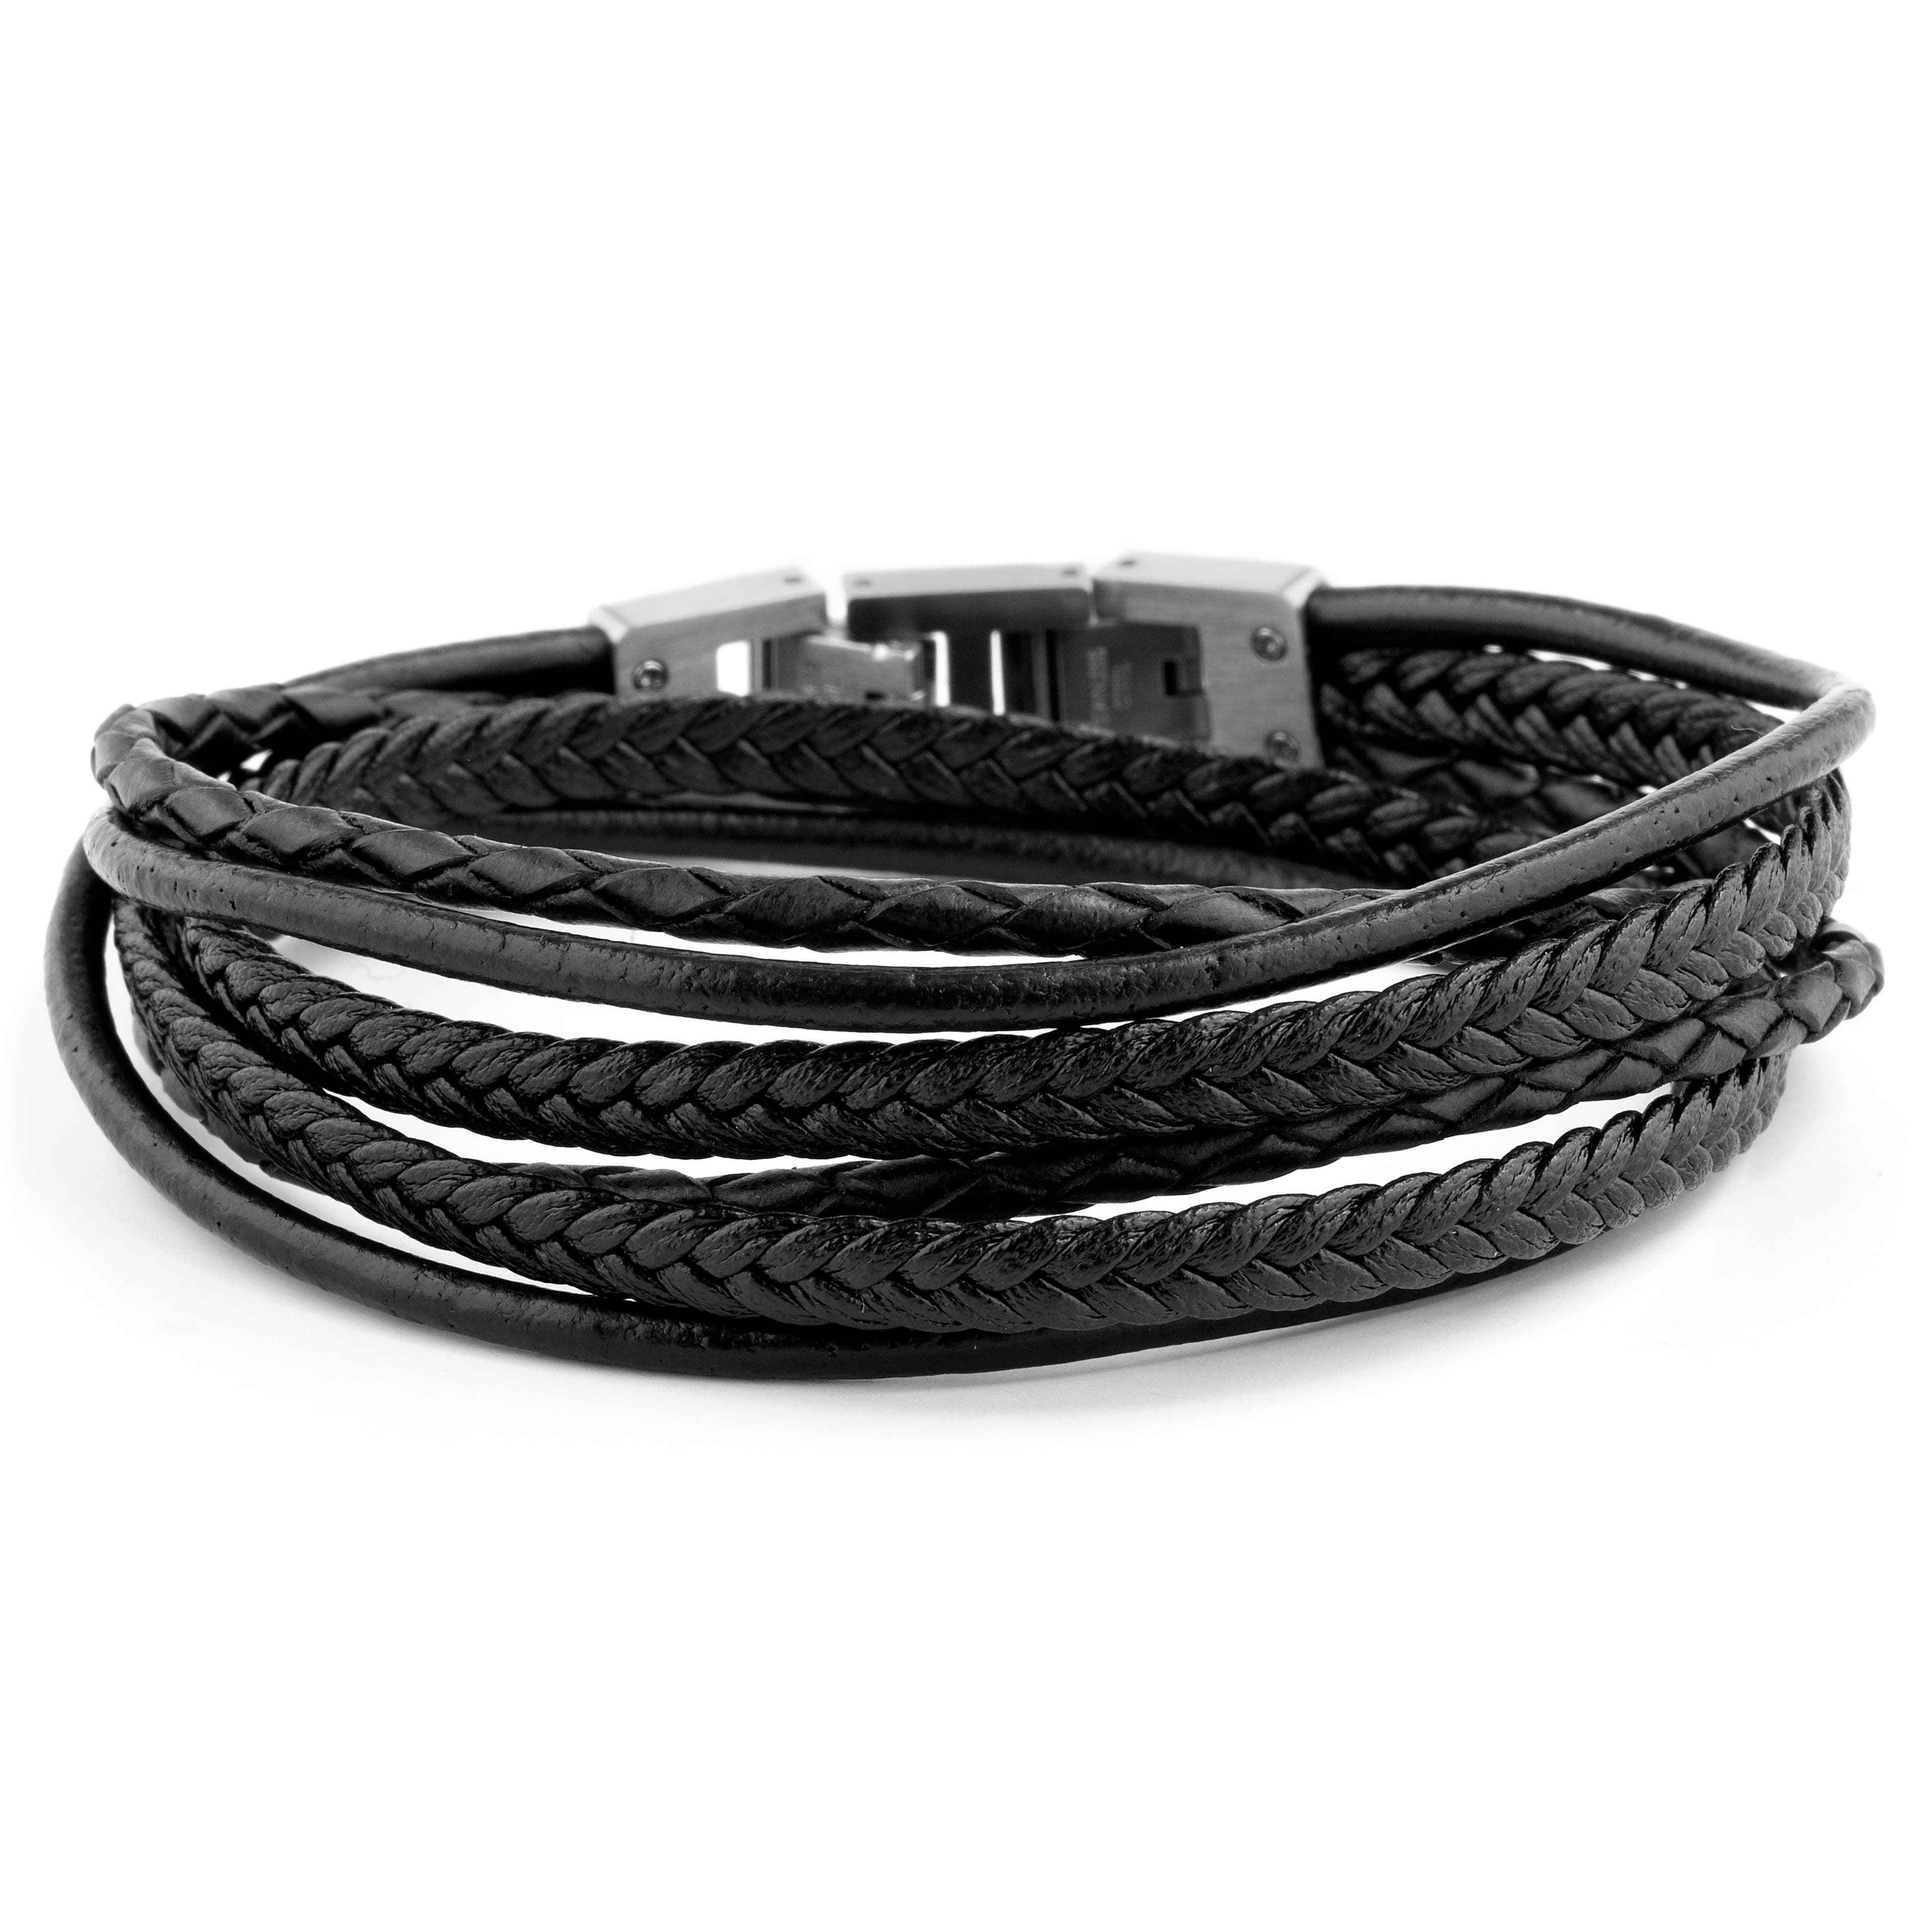 Engravable Thin Silver-Tone Stainless Steel Cuff Bracelet - for Men - Lucleon